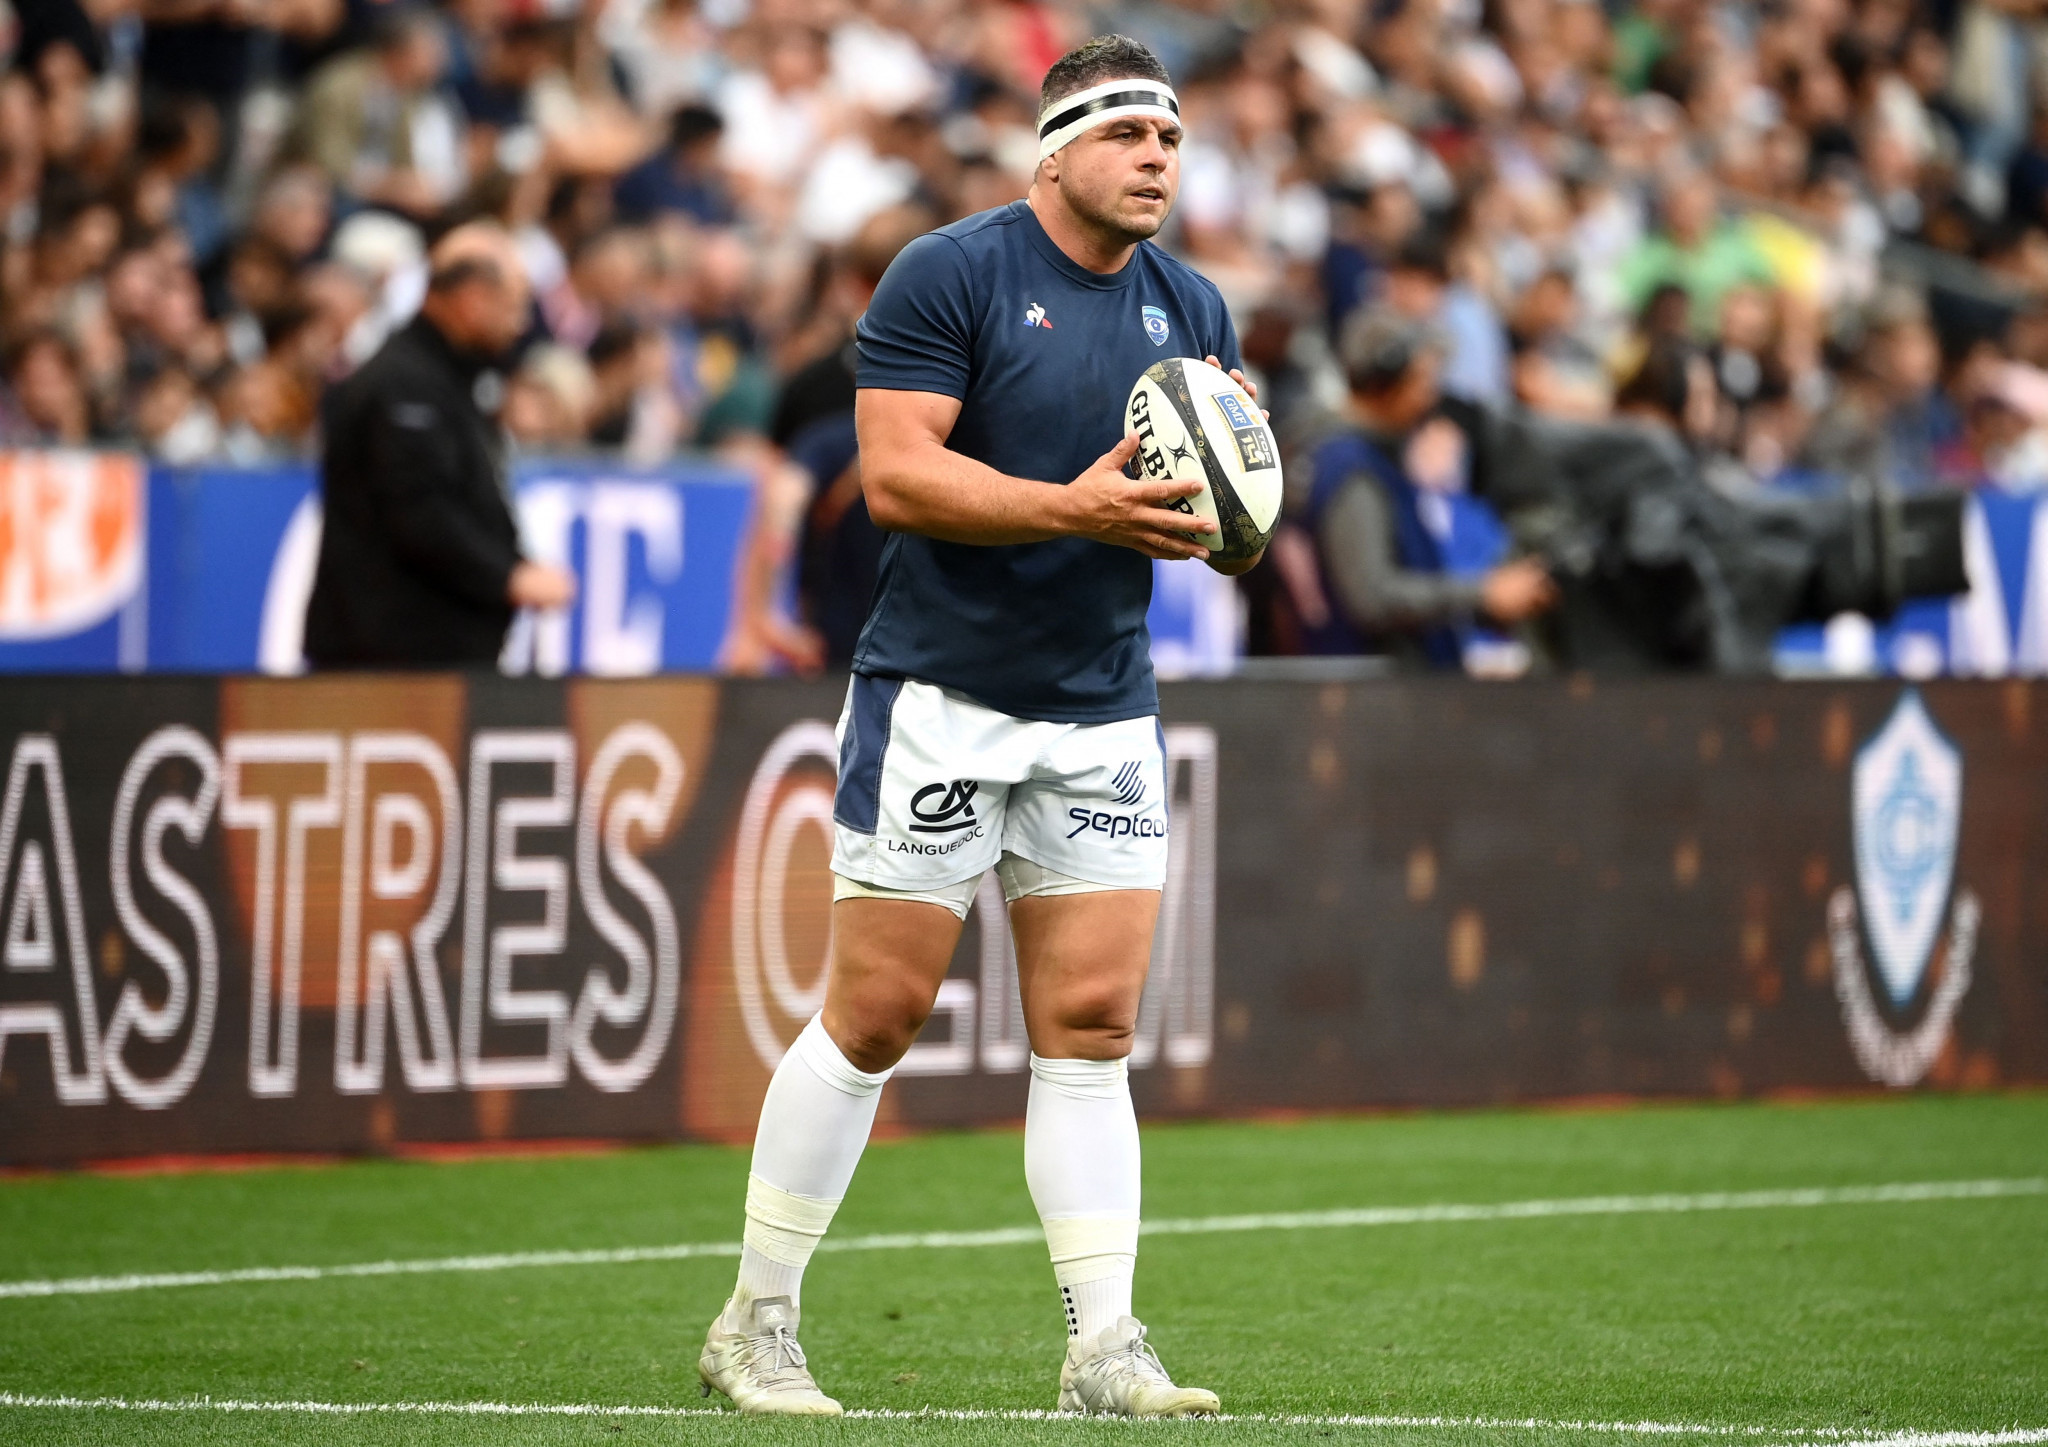 Former French skipper Guilhem Guirado has been proposed by Patrick Buisson to be the new vice-president should he be elected as leader of the organisation ©Getty Images